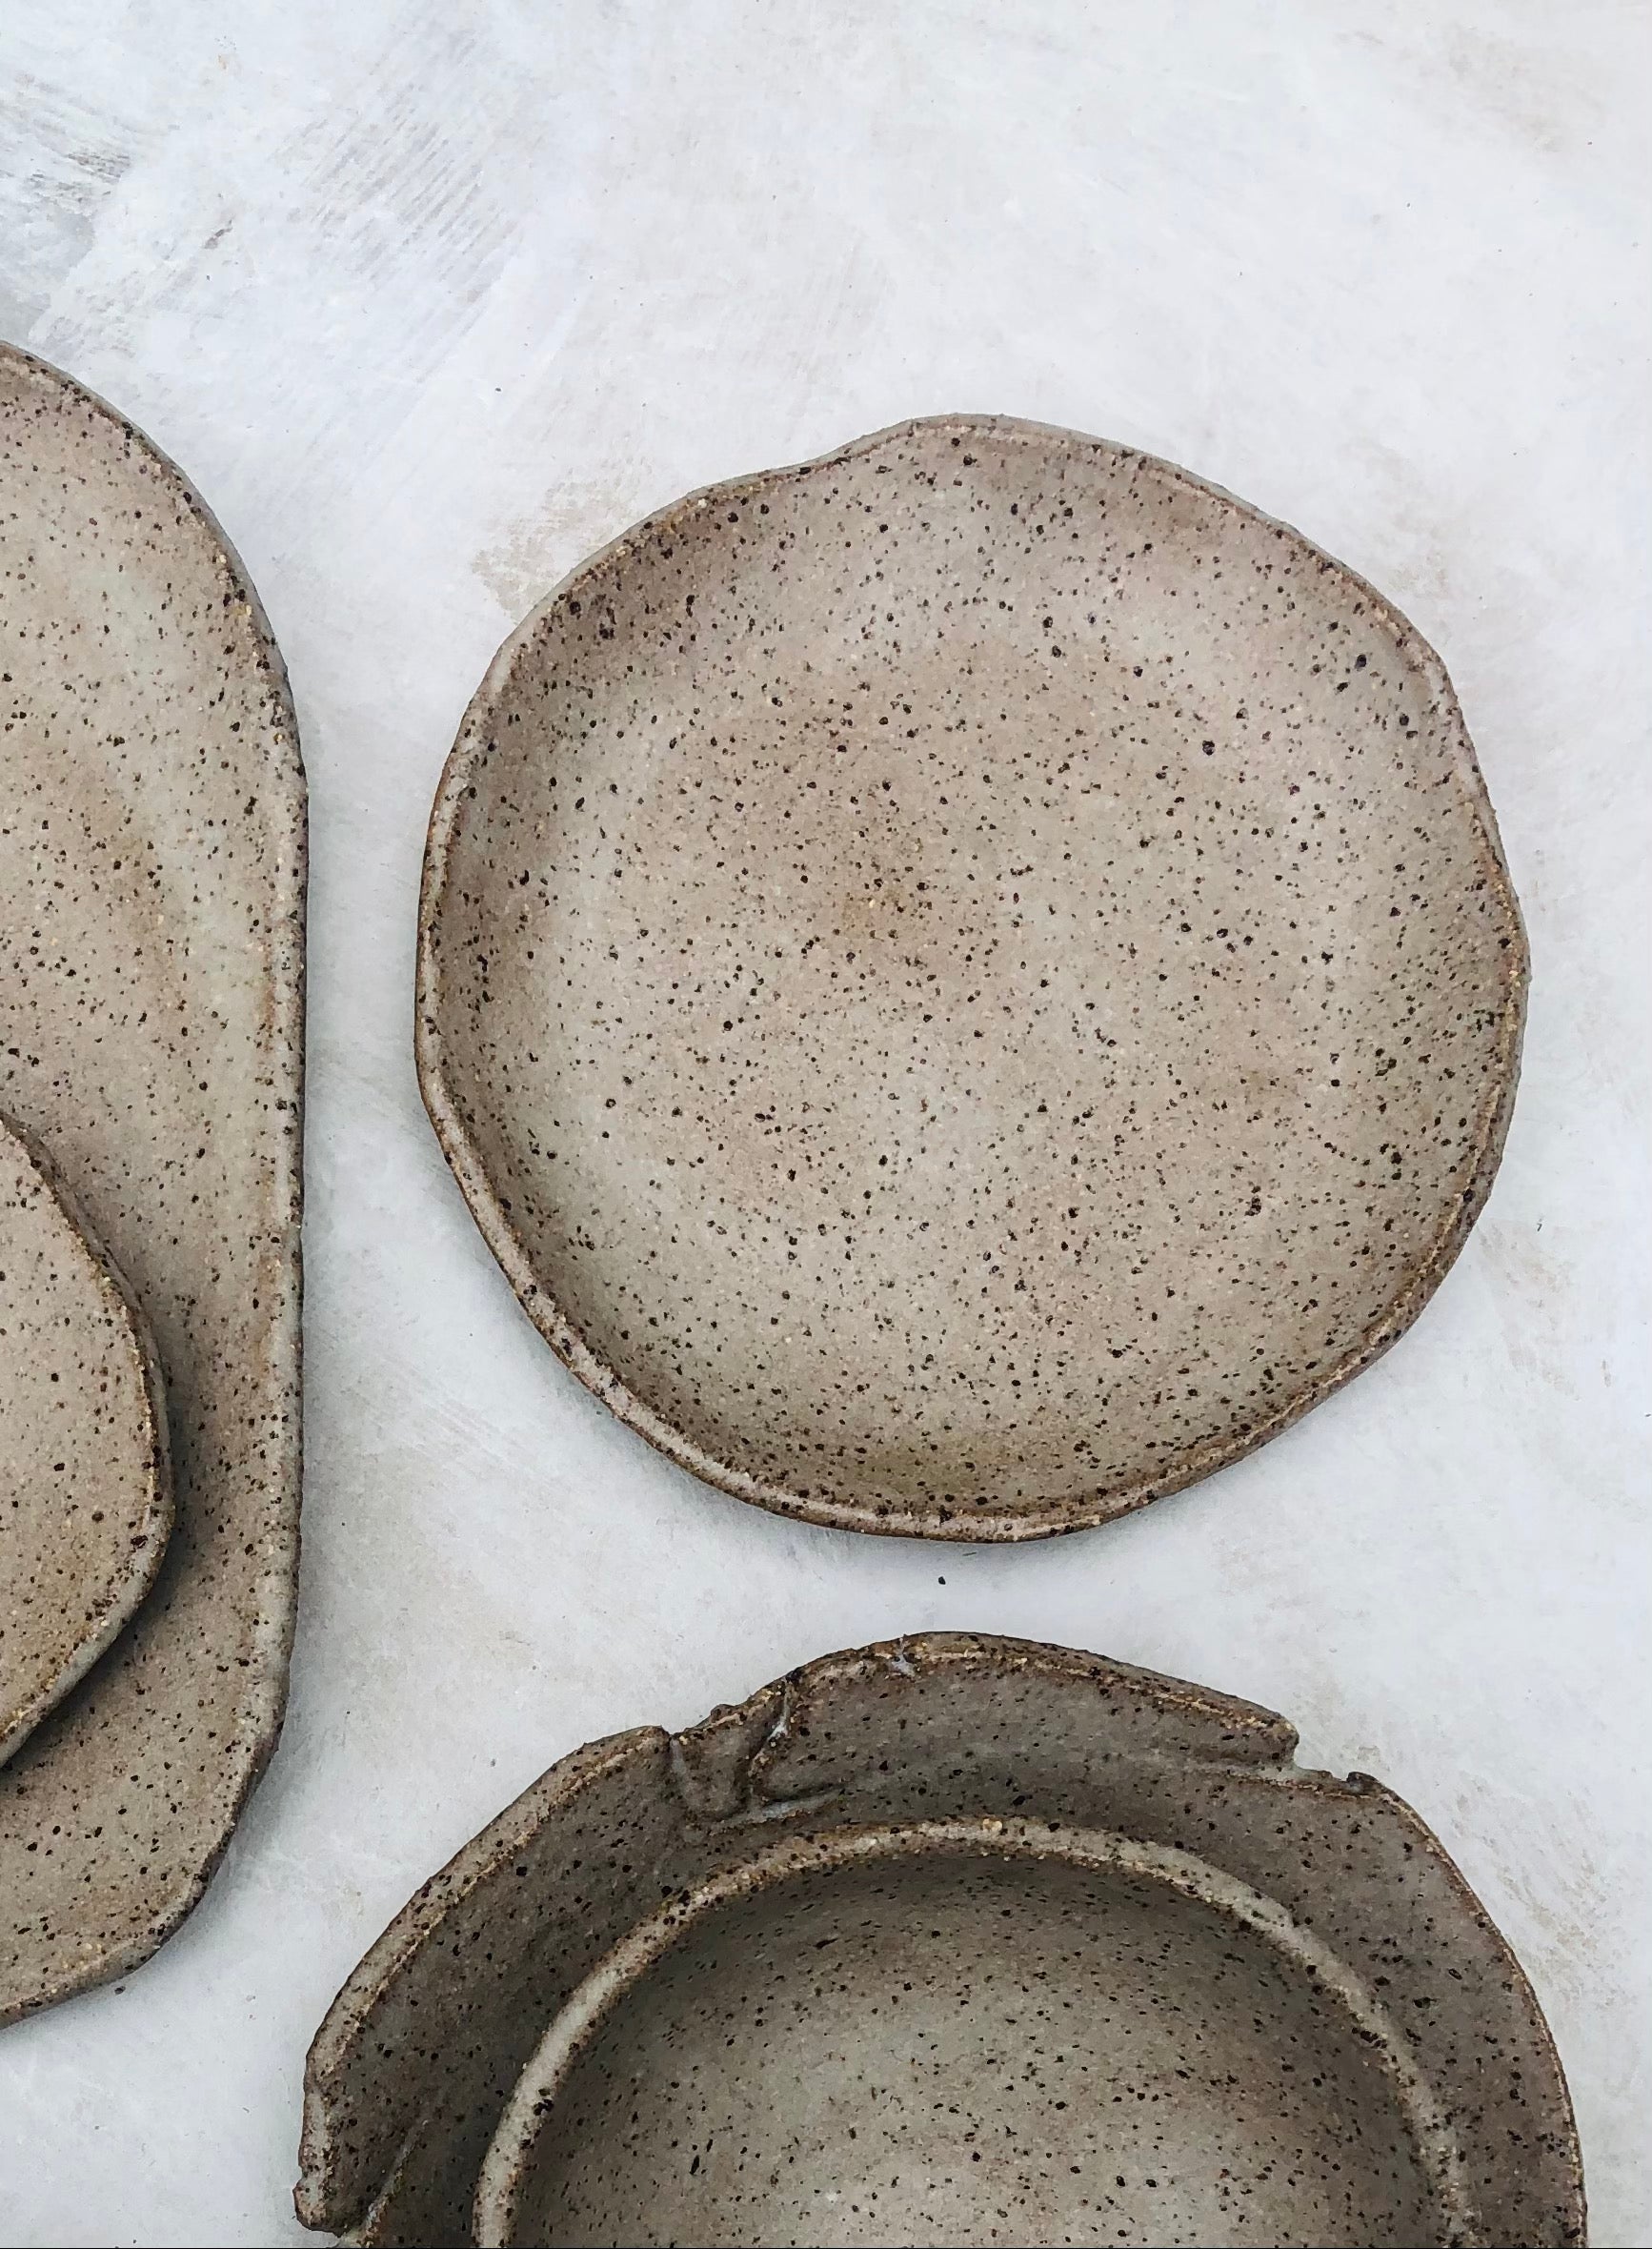 Tableware - Plates & Bowl - Speckled Earth